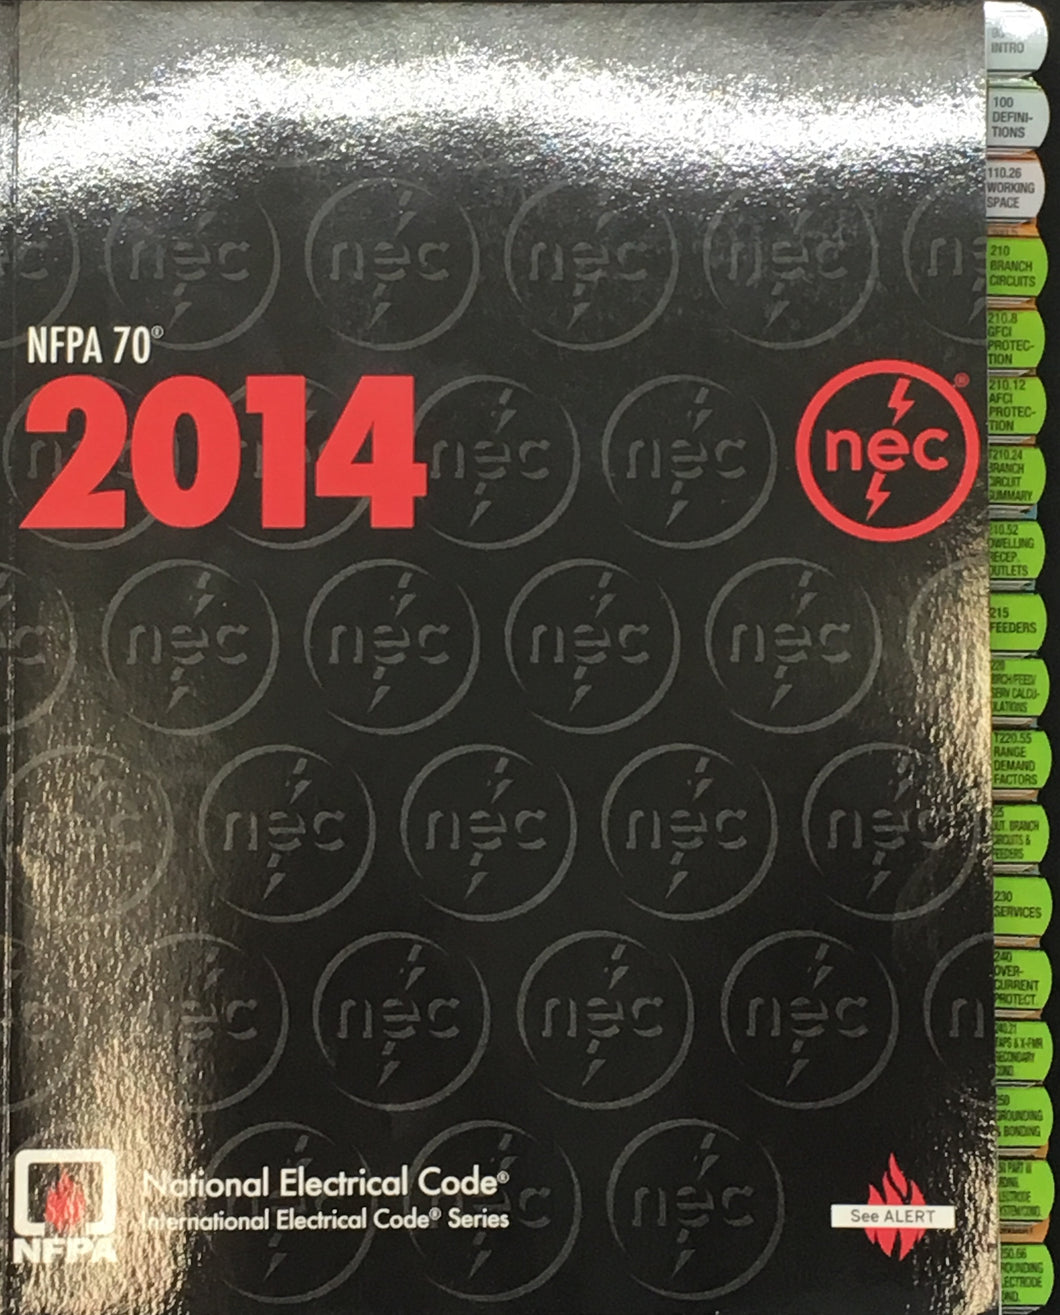 Highlighted and Tabbed NFPA 70: National Electrical Code (NEC) Softbound, 2014 Edition [Ultimate]